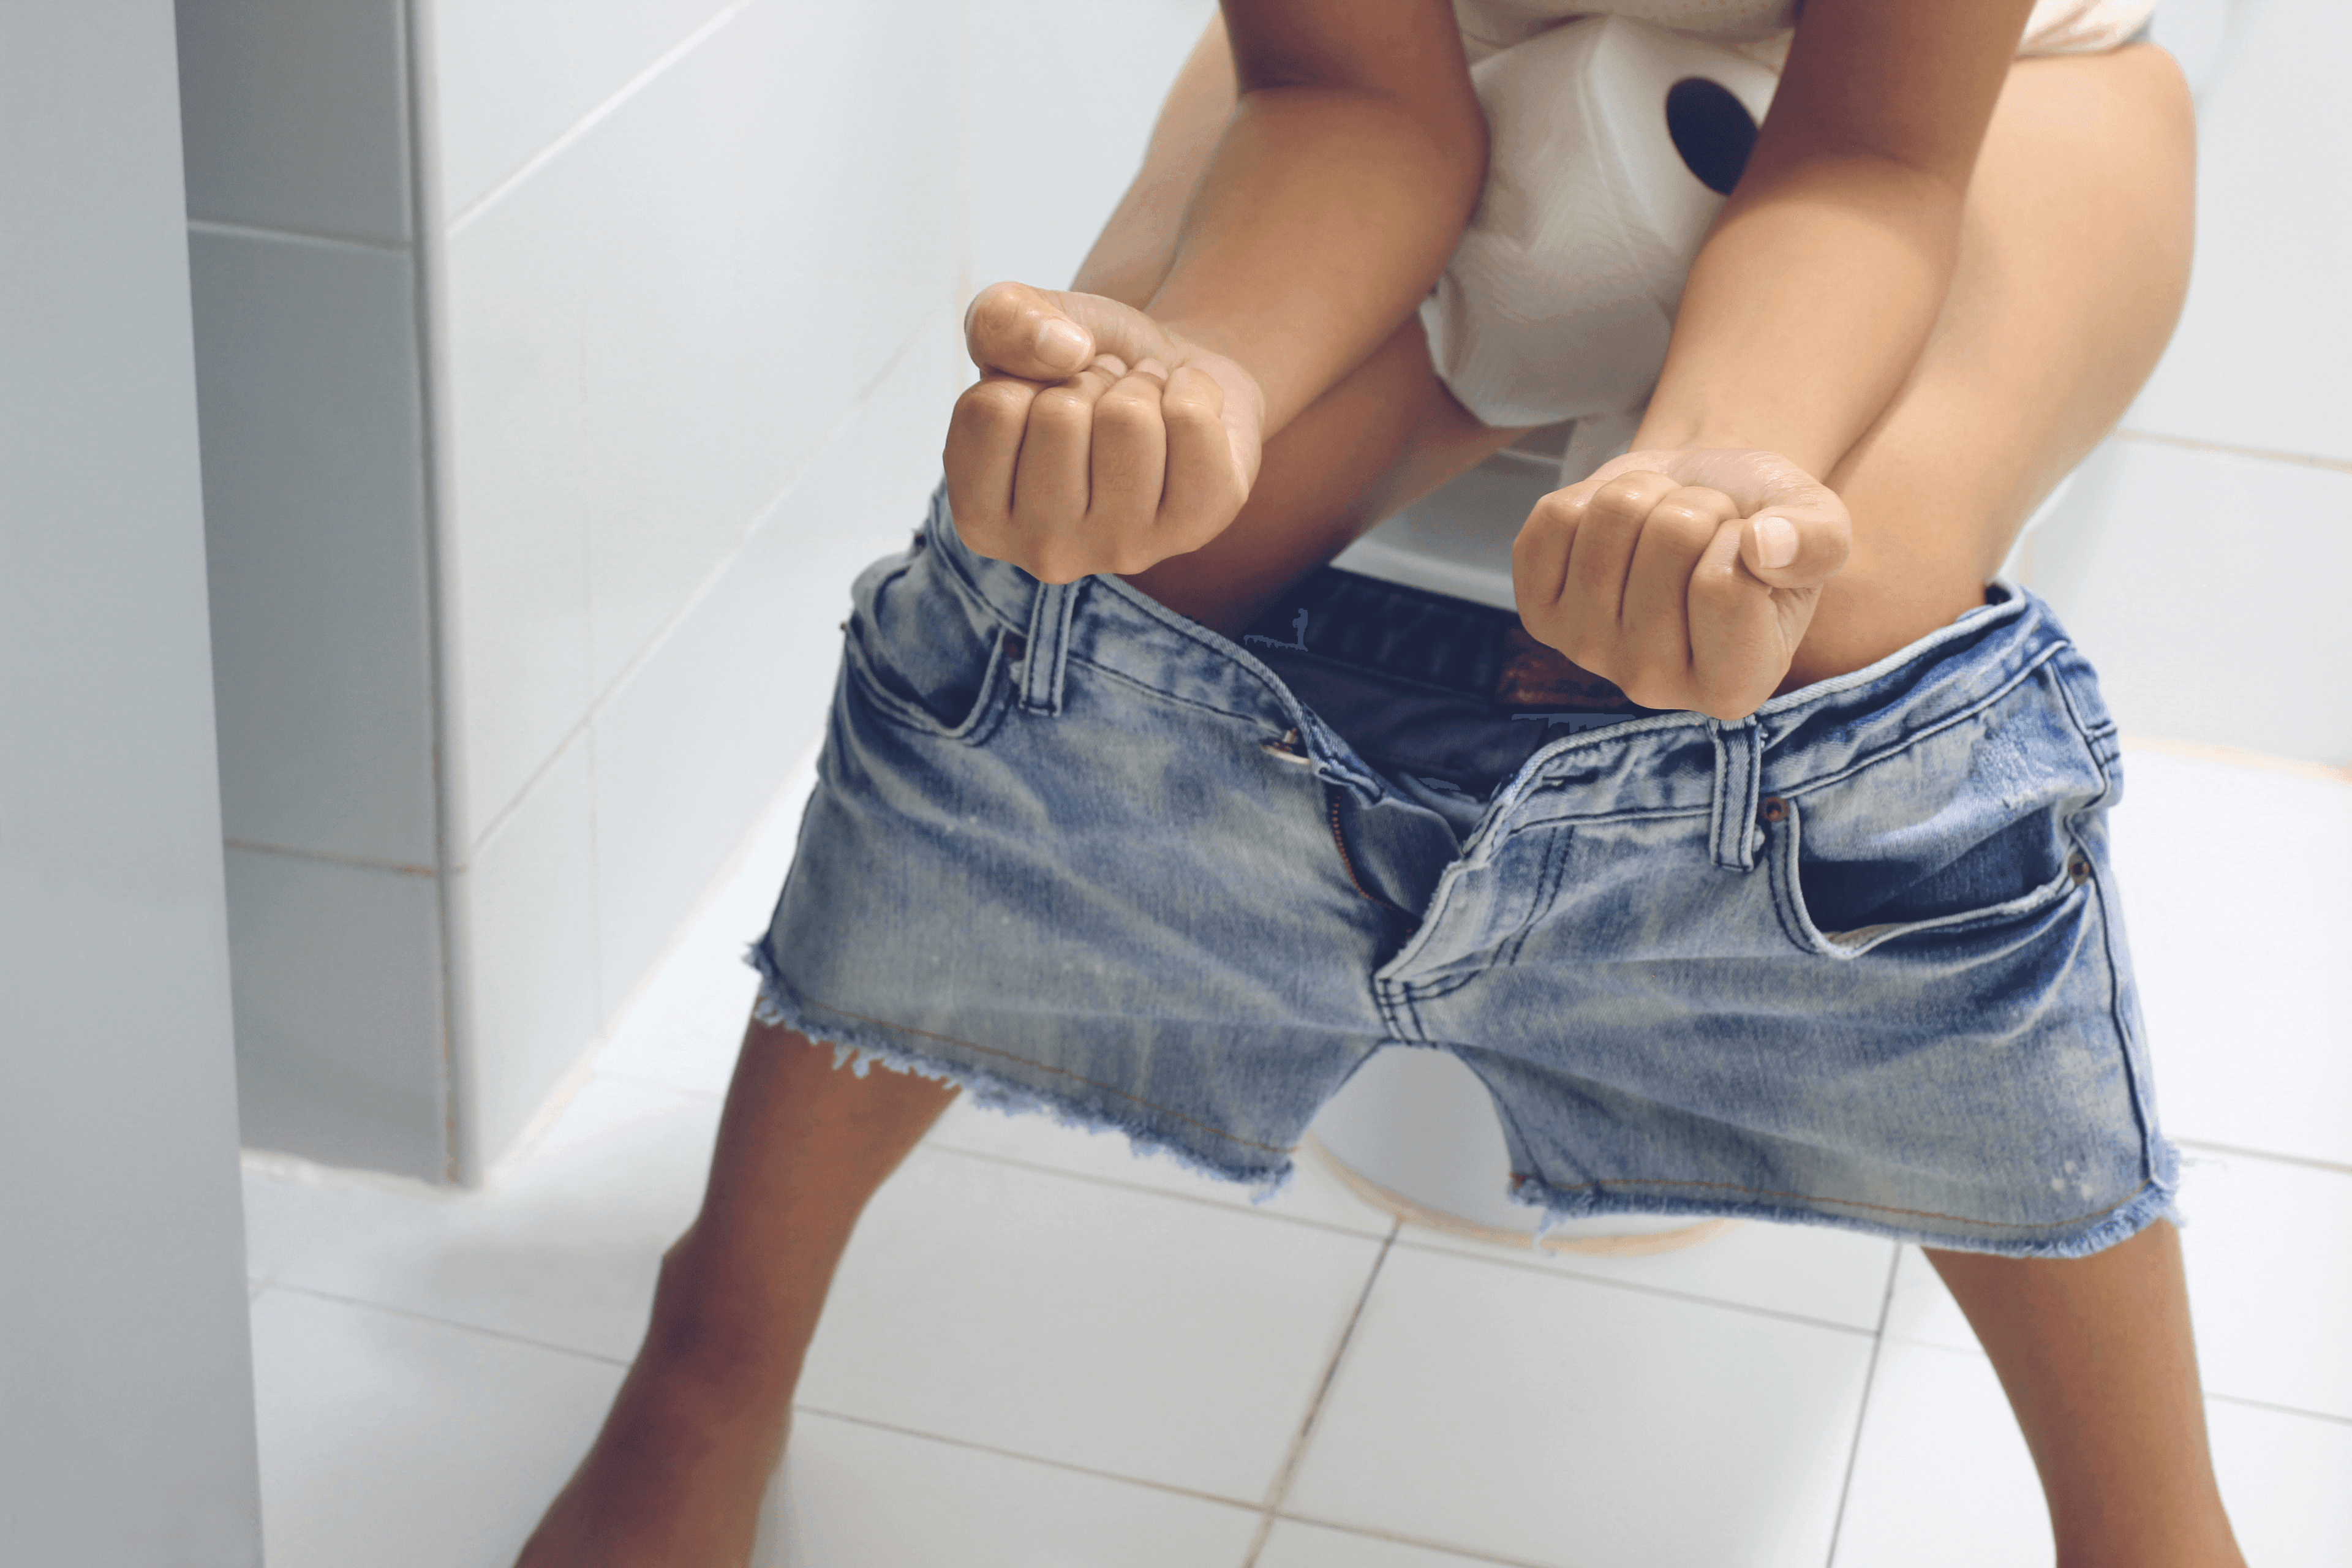 Child with jeans shorts sitting on a toilet.